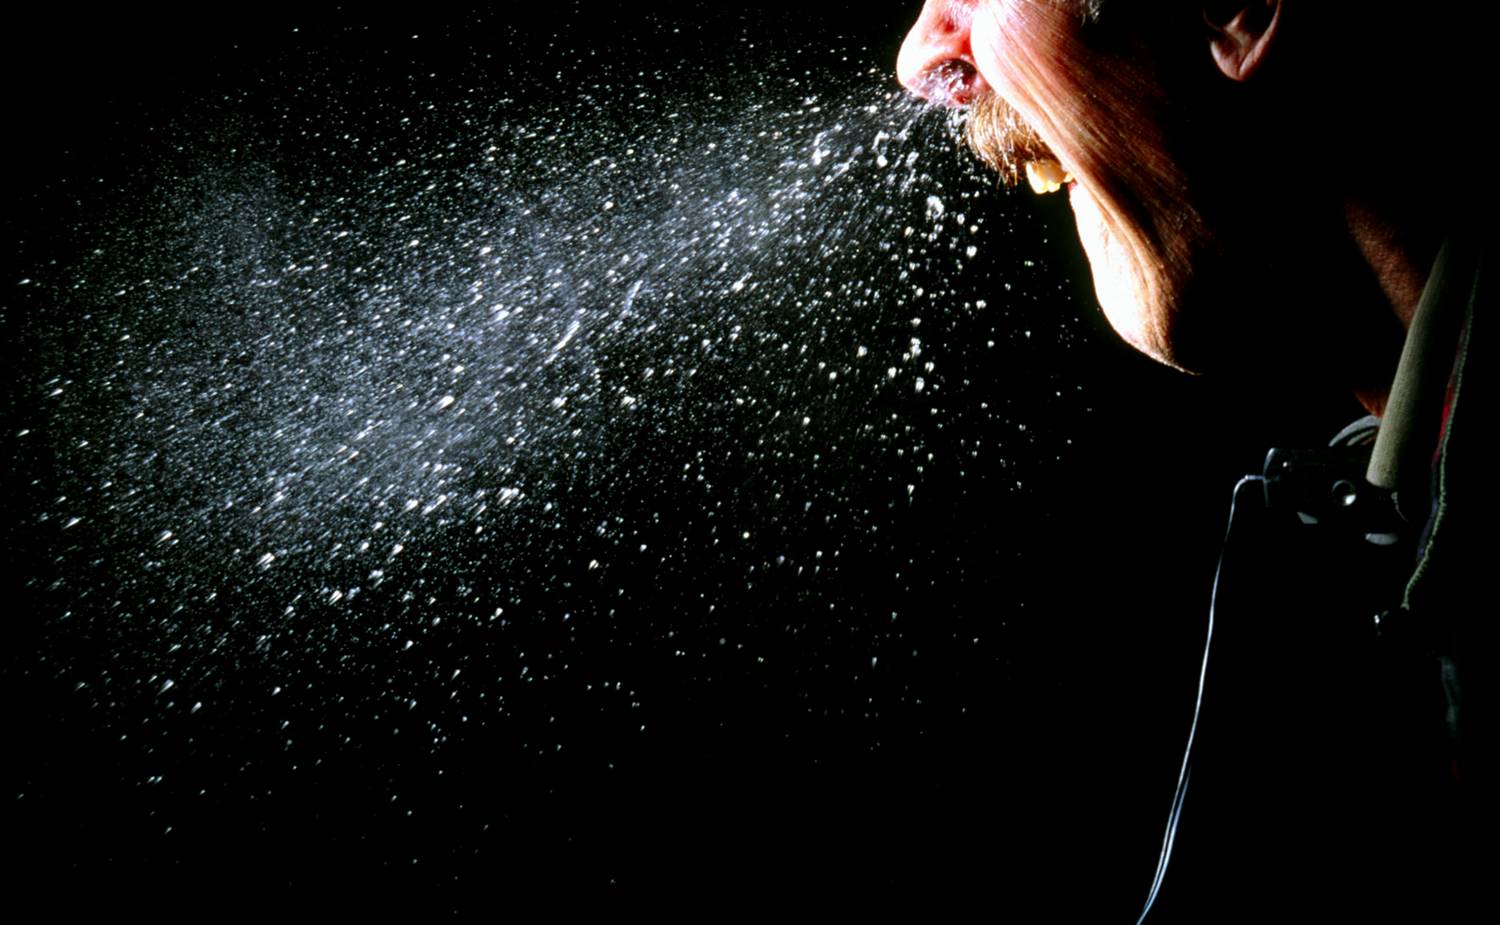 People say 'Bless you' when you sneeze because when you sneeze, your heart stops for a millisecond